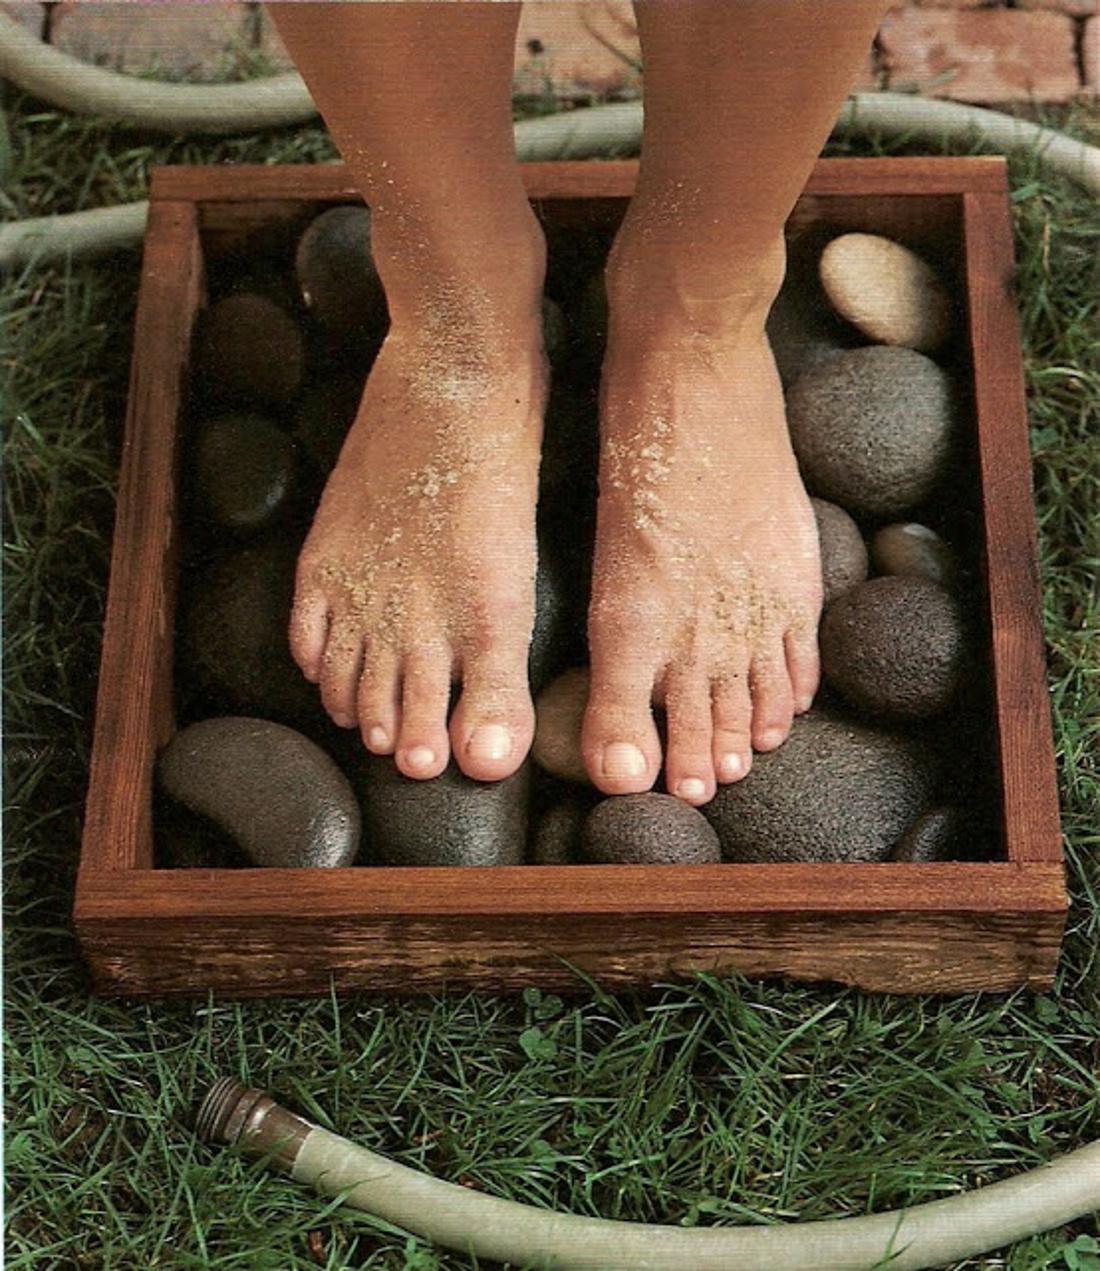 Rinse your dirty feet off in a waterproof frame filled with flat stones.